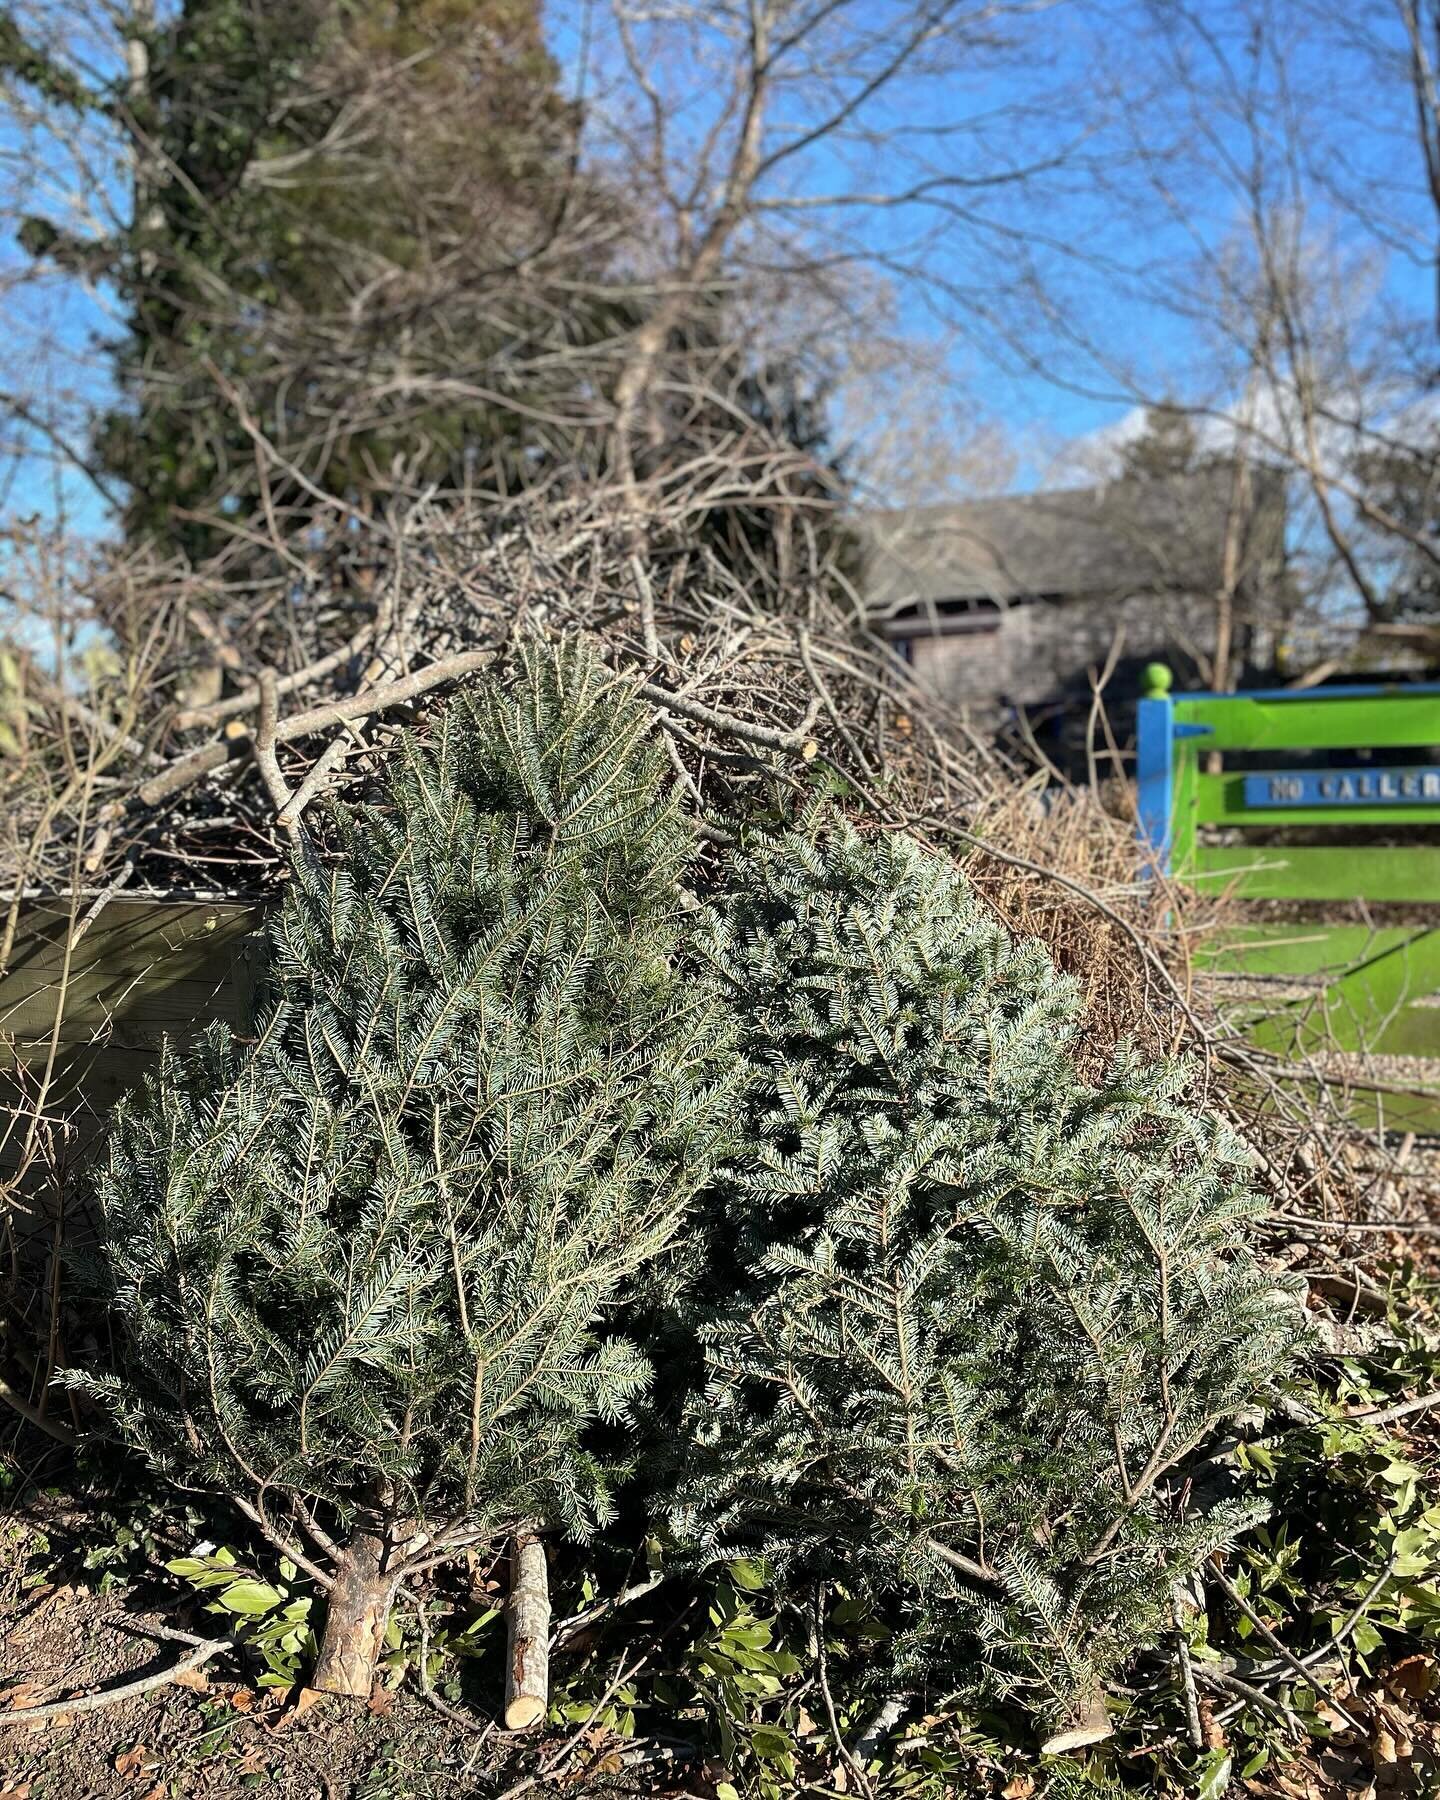 Dull as dishwater admittedly.  But if you&rsquo;re taking down your Christmas tree bring it to Madoo for chipping.  With our new community partner @ray_smith_associates we&rsquo;ll chip it and add it to our compost pile.  Drop it off on either side o